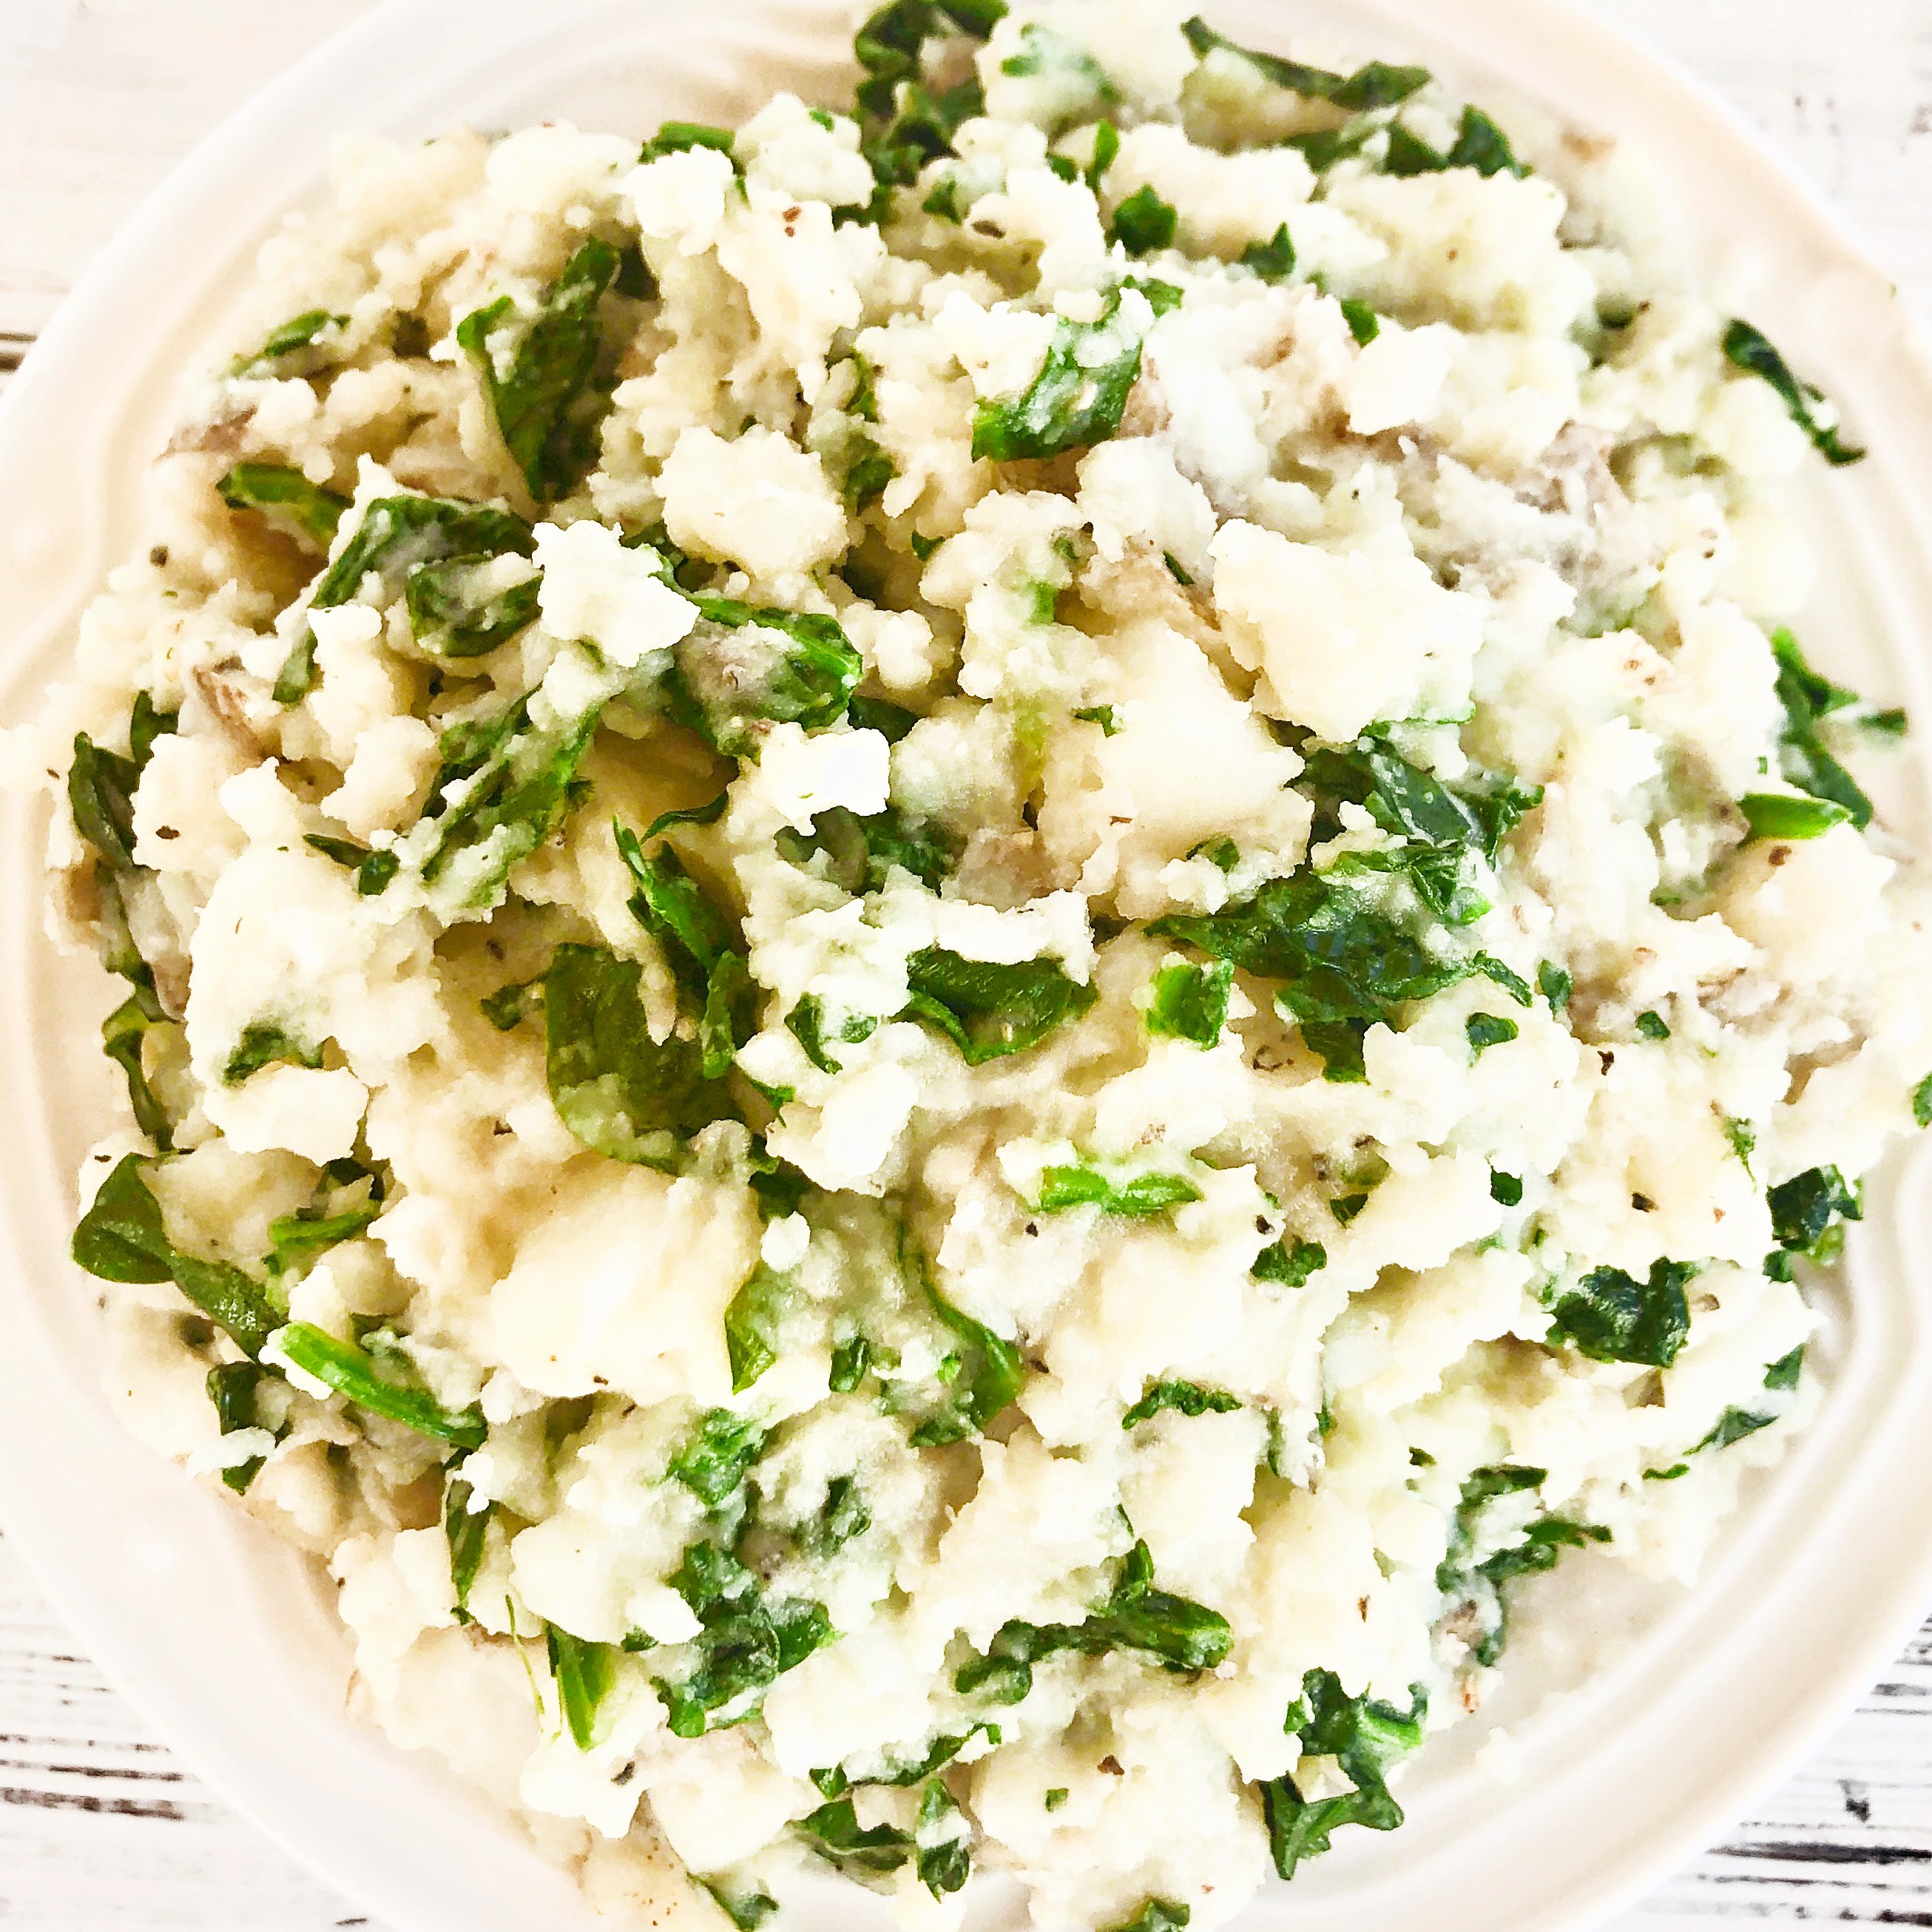 Spinach Mashed Potatoes - Fresh spinach sauteed with garlic with creamy mashed potatoes, butter, and seasonings. This hearty and healthy side dish is ready to serve in about 20 minutes.  via @thiswifecooks